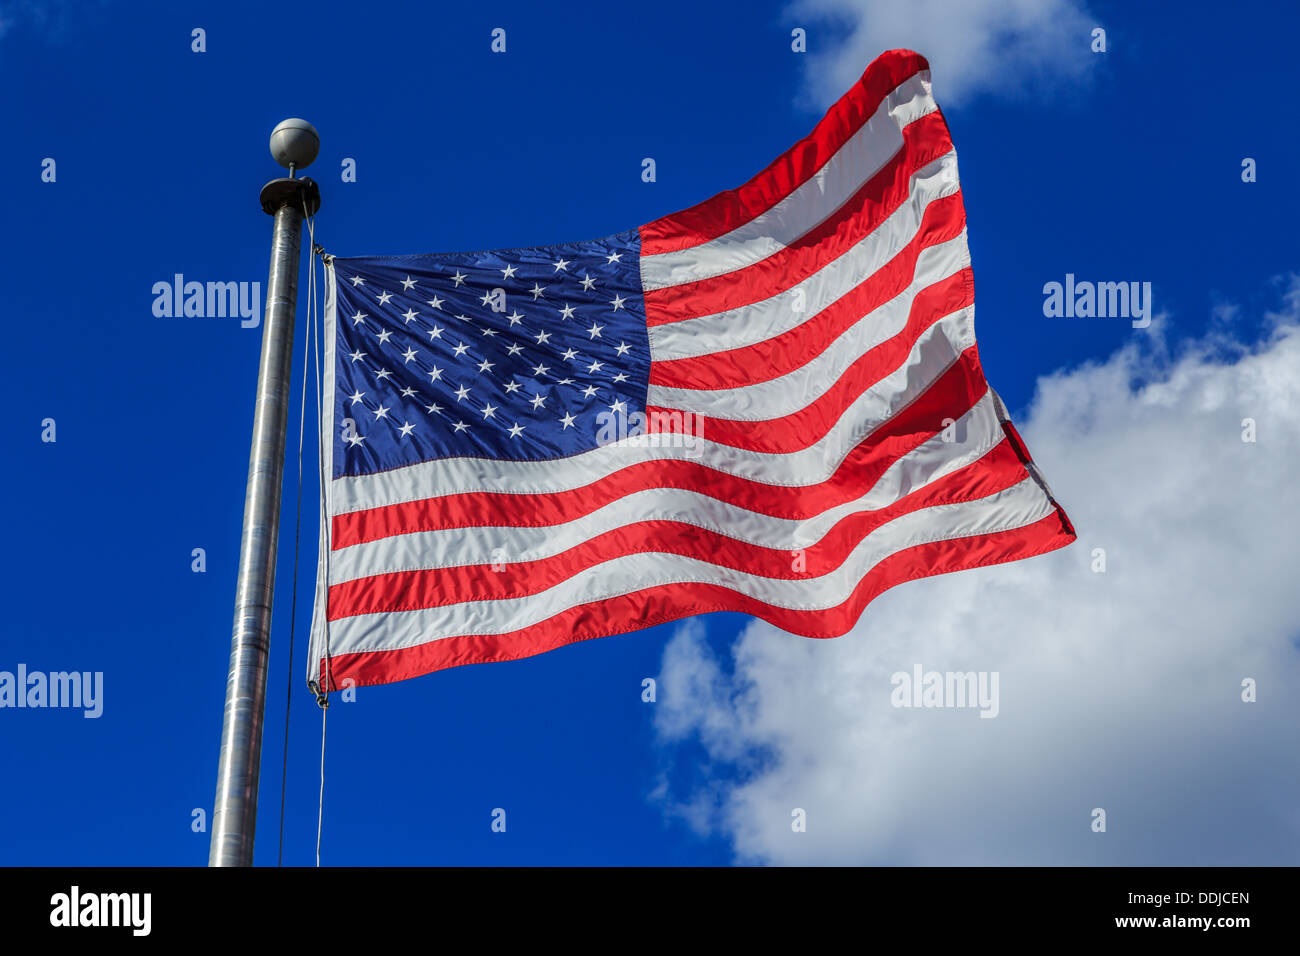 A photograph of an American flag blowing in the breeze against a very blue sky with some contrasting clouds Stock Photo